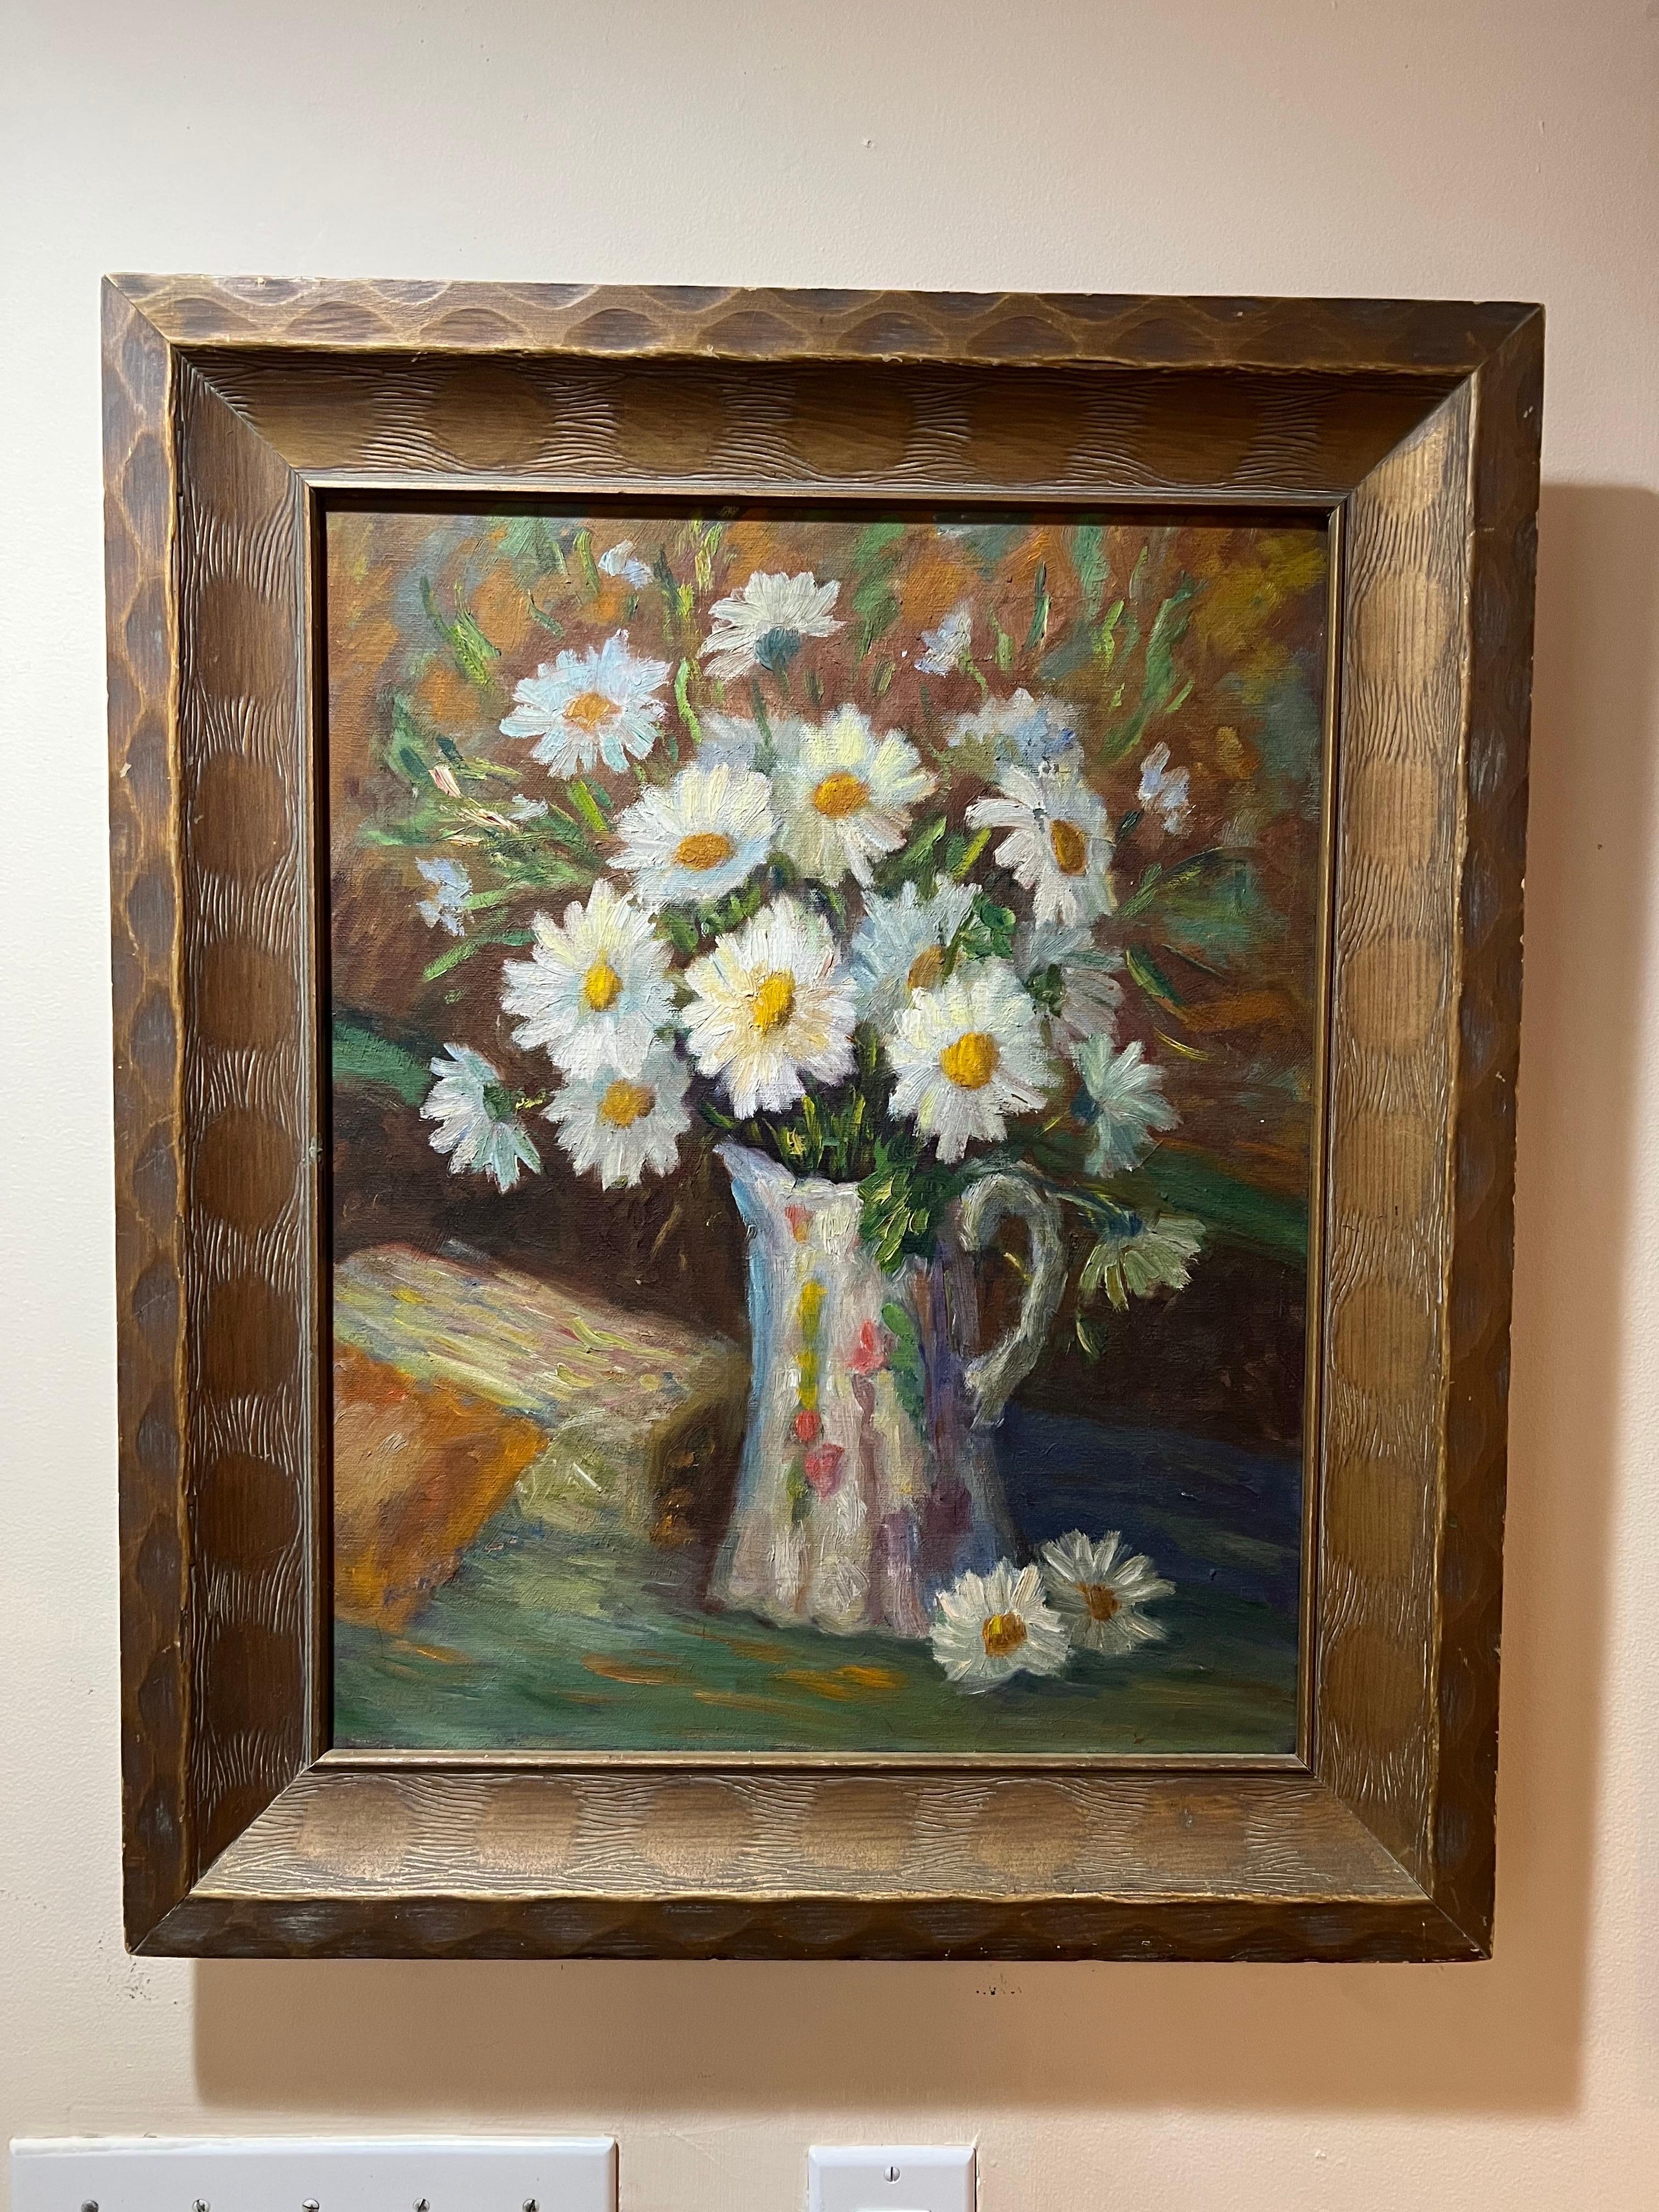 Impasto Impressionist painting in the style of Vincent Van Gogh. Gorgeous still life composition of Daisies. Housed in a solid wooden frame by Heirloom. Impressionist in style with heavy impasto style. Signed but illegible. Domestic parcel shipping